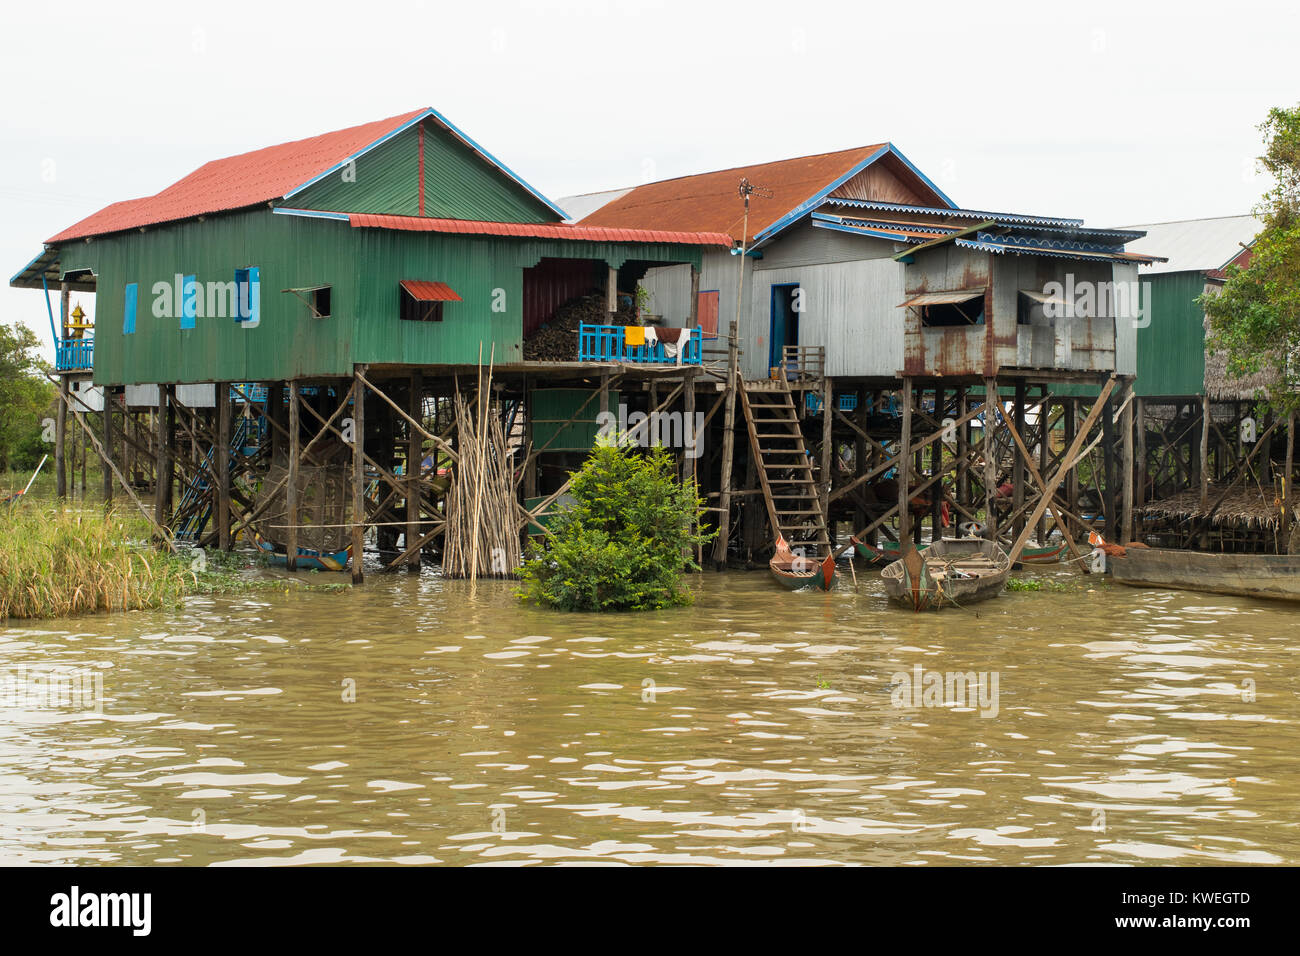 Wood and metal settlement, group of houses buildings on stilts, Kampong Phluk floating village, Tonle Sap Lake, Siem Reap, Cambodia, South East Asia Stock Photo